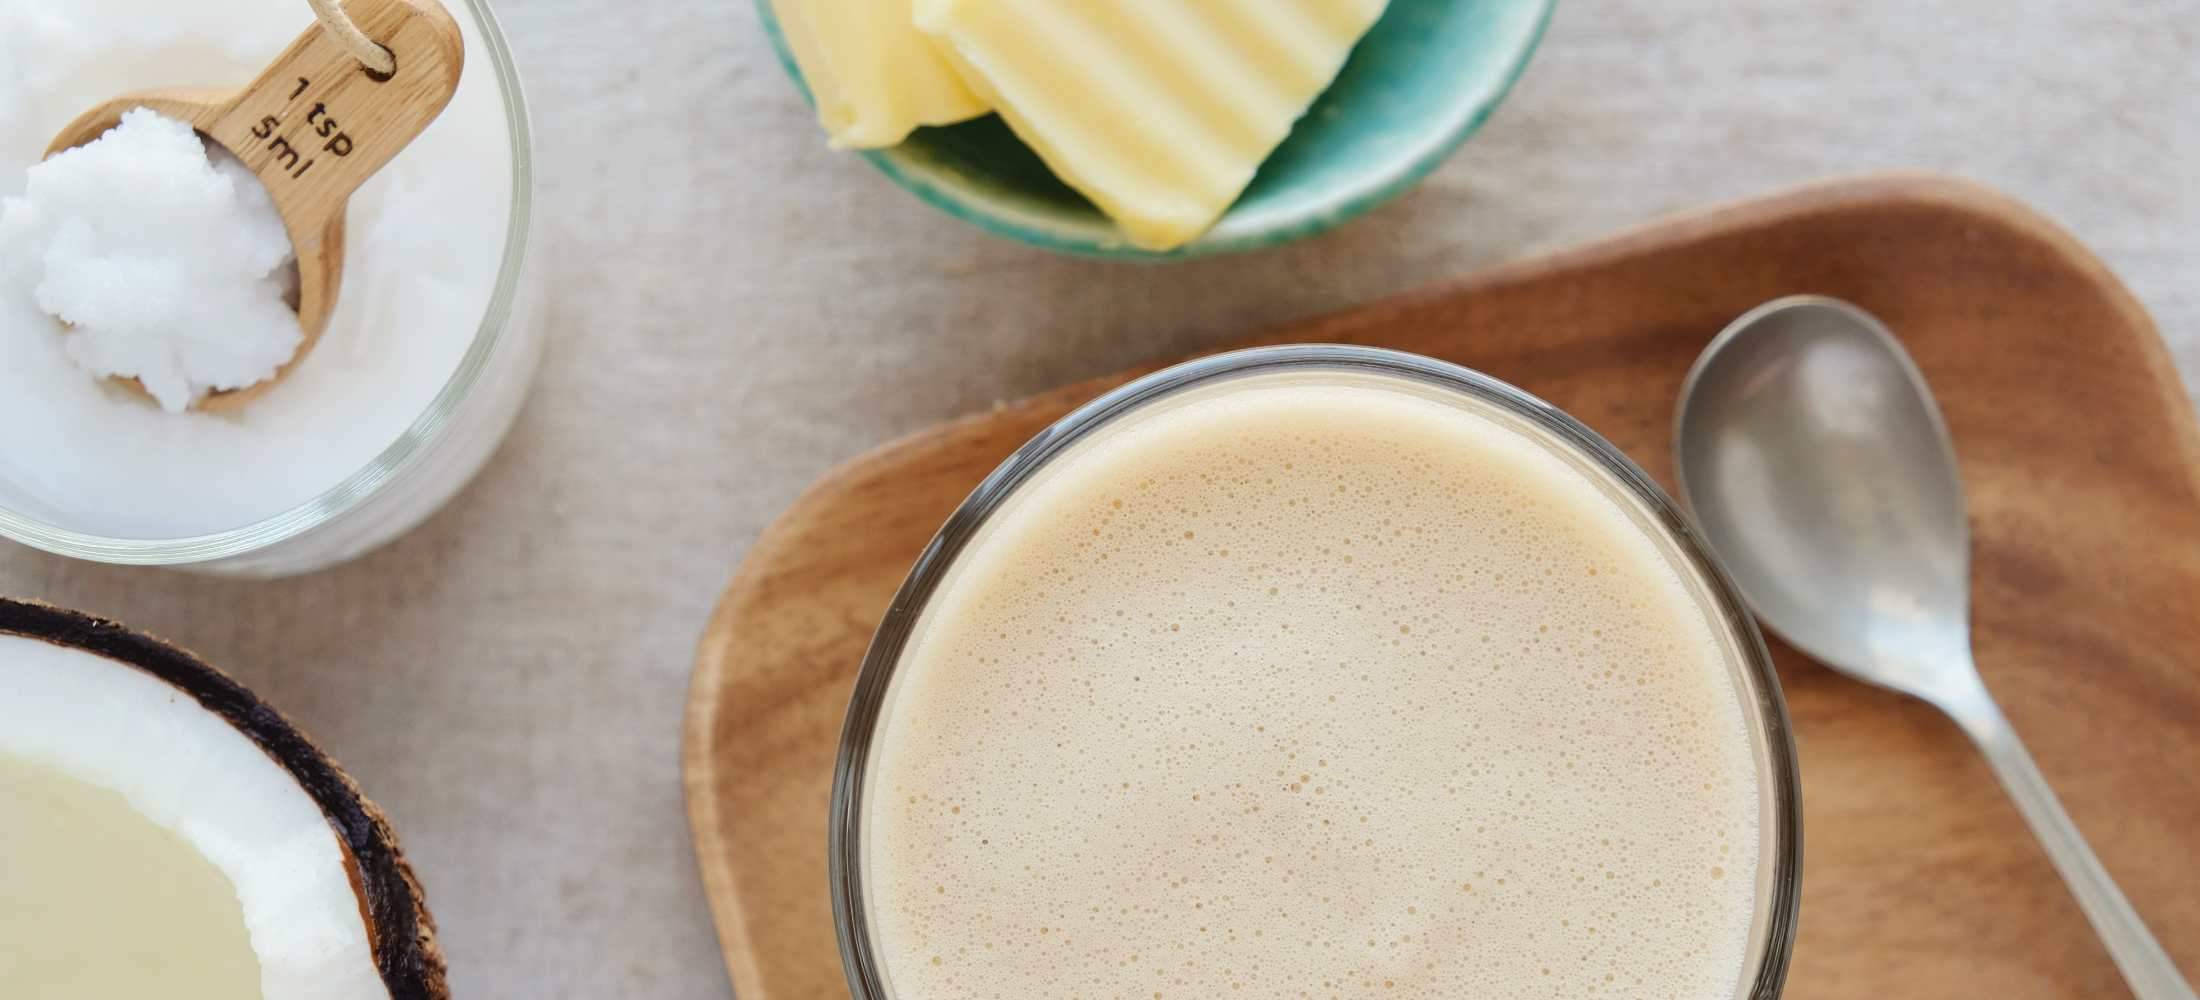 From Grass-Fed Butter to Activated Charcoal, 6 New Additions to Try in Your Coffee